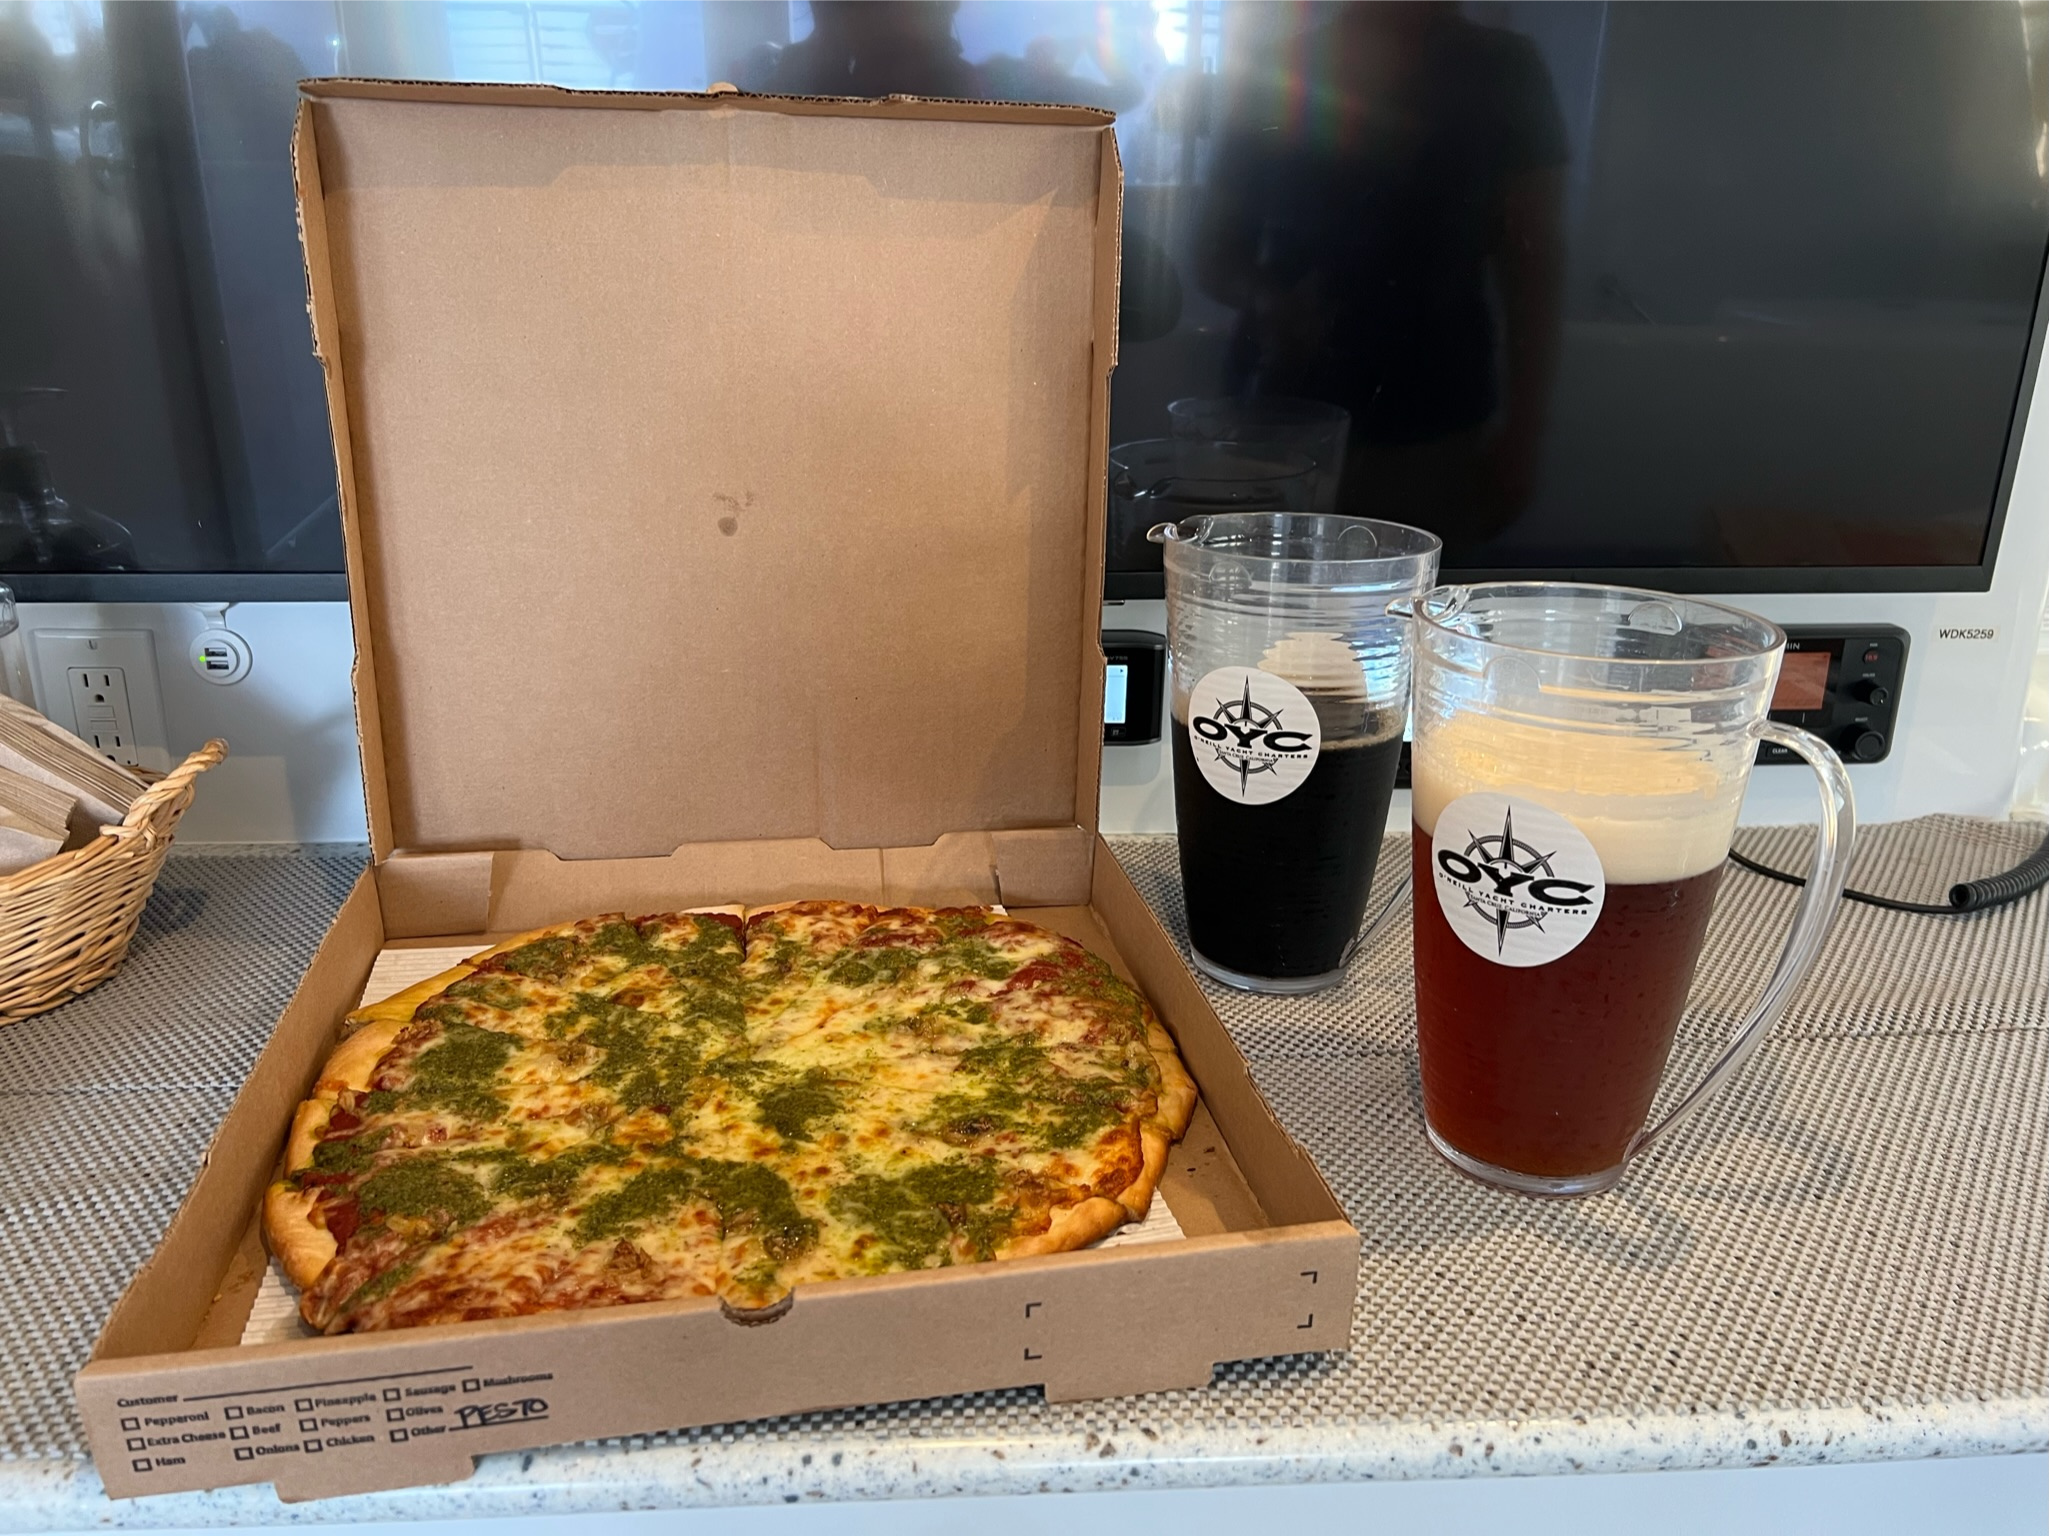 Pizza & beer from a local Santa Cruz brewery are on display for passengers to indulge in, these complementary options available during Local Beer Sampling or Wine Tasting sails with options during daytime or sunset